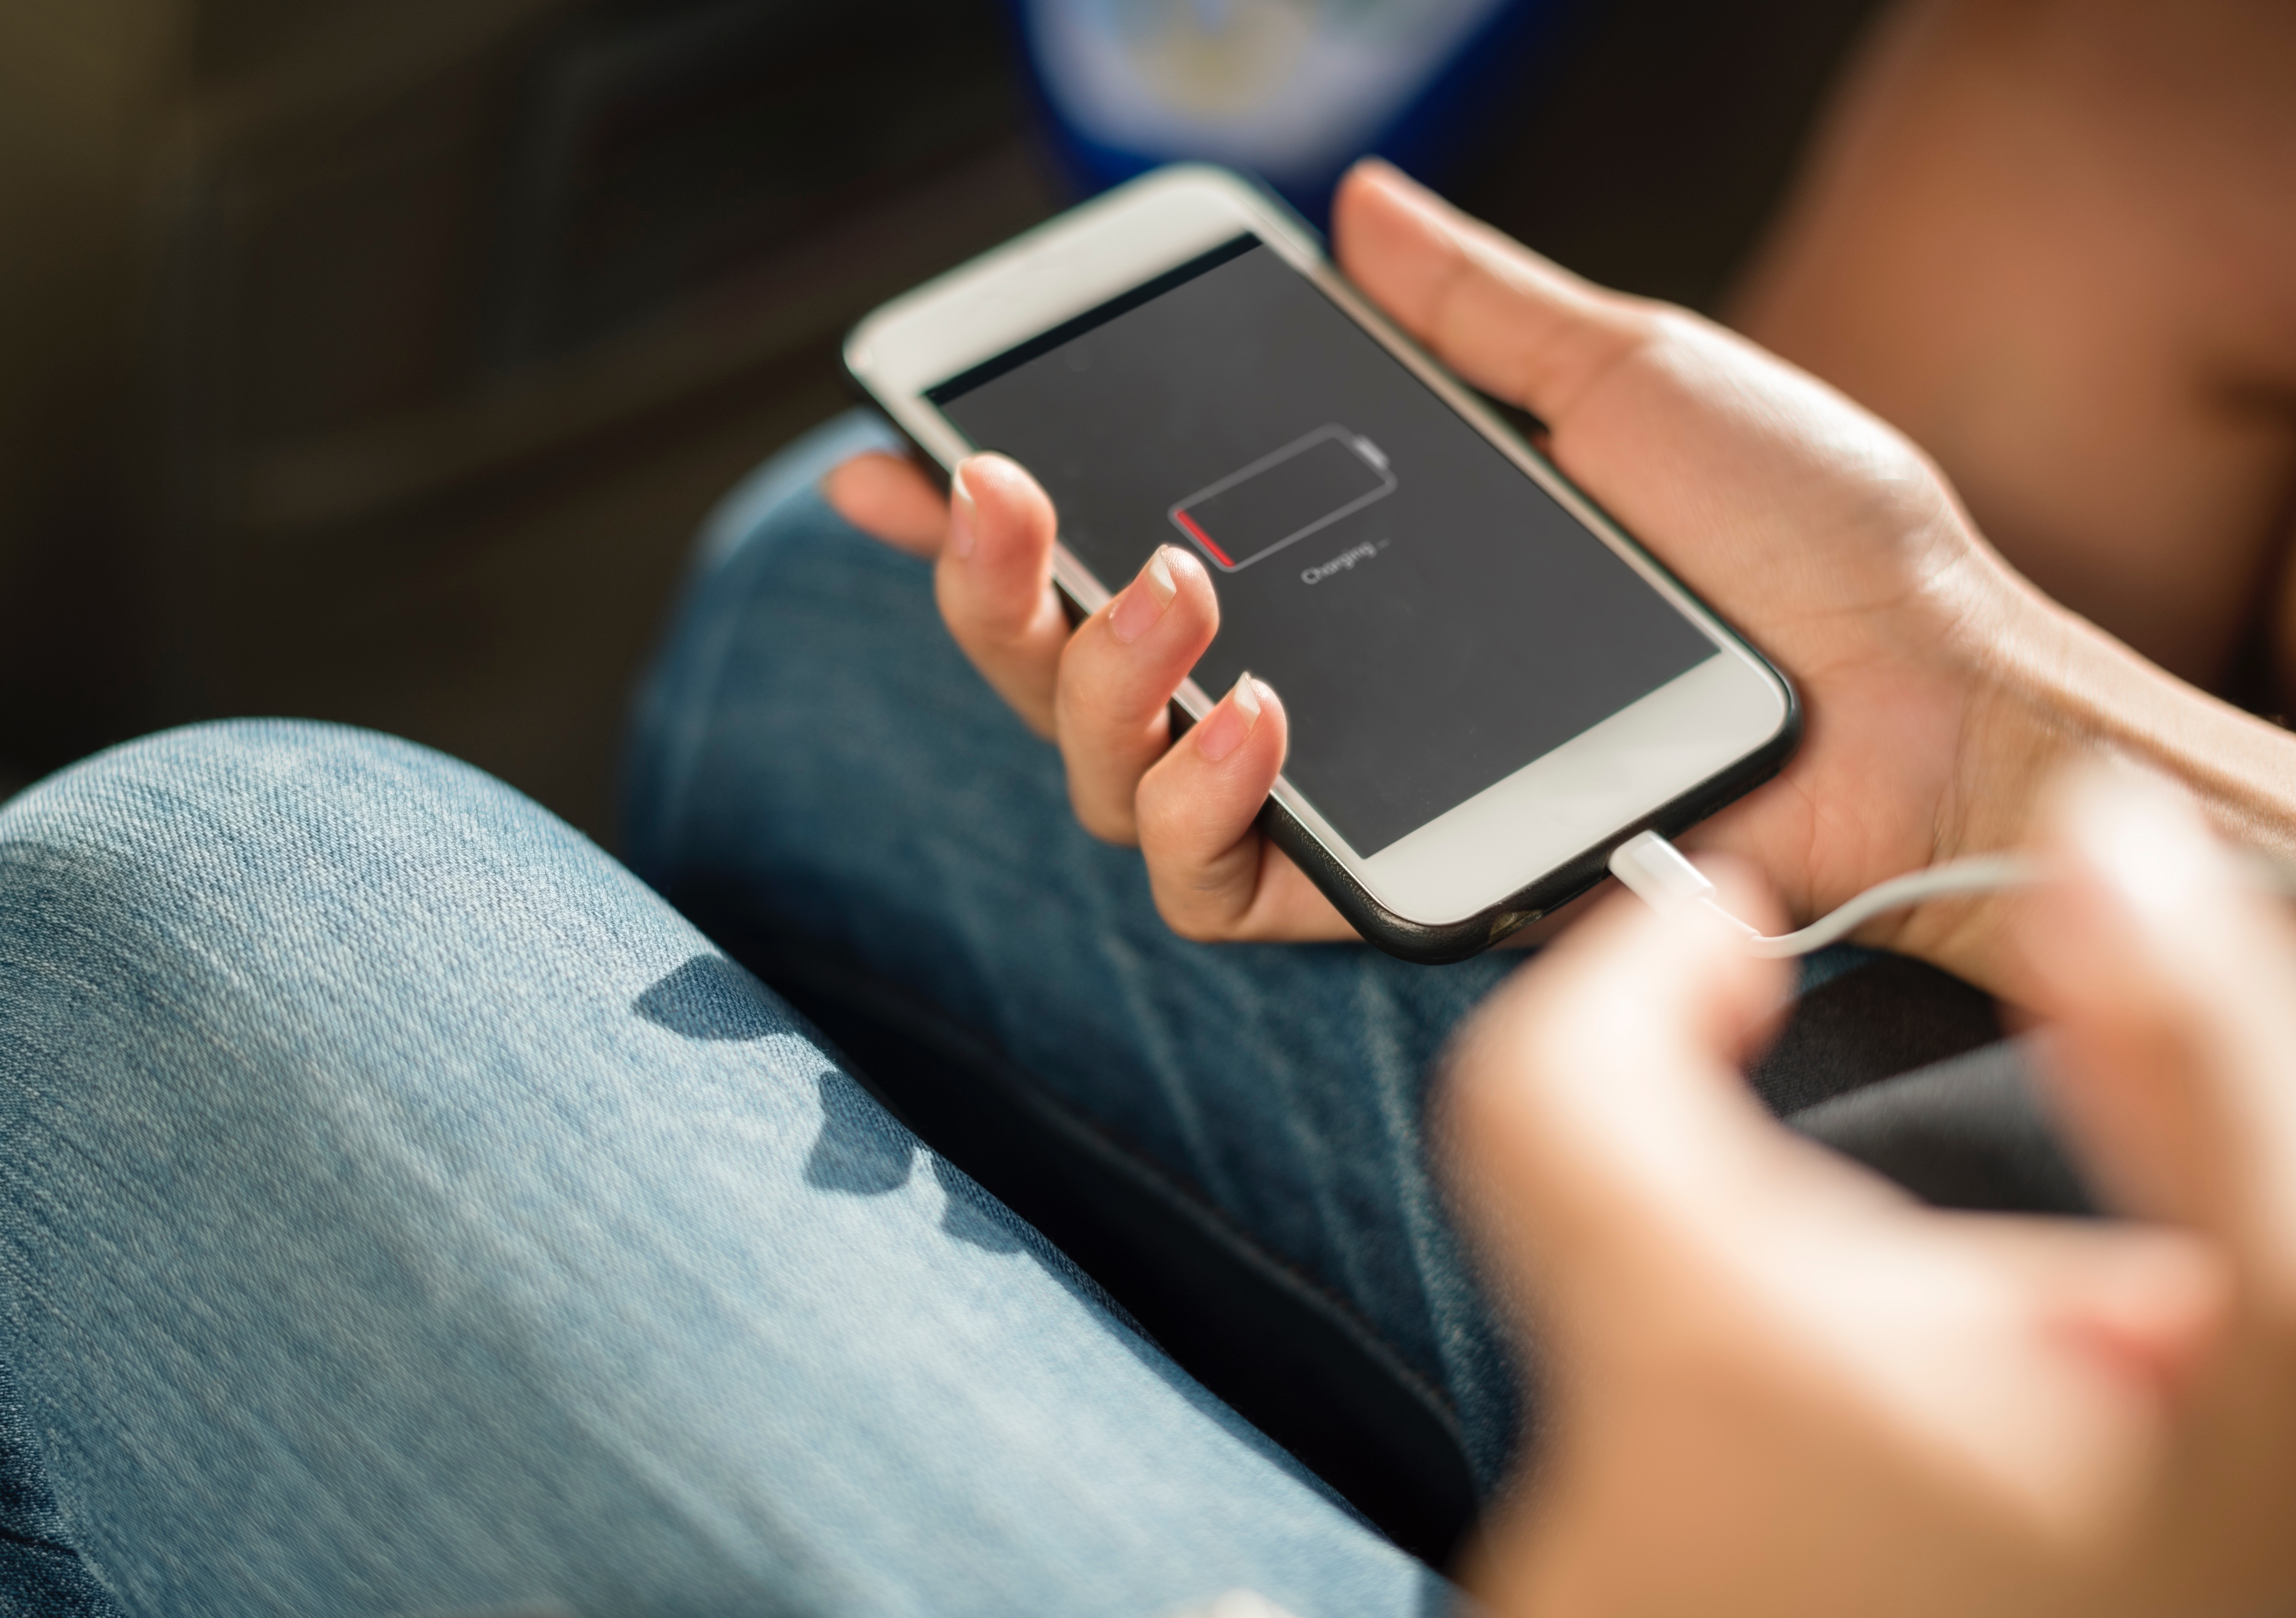 iPhone Charging Slowly – Here’s What to Do